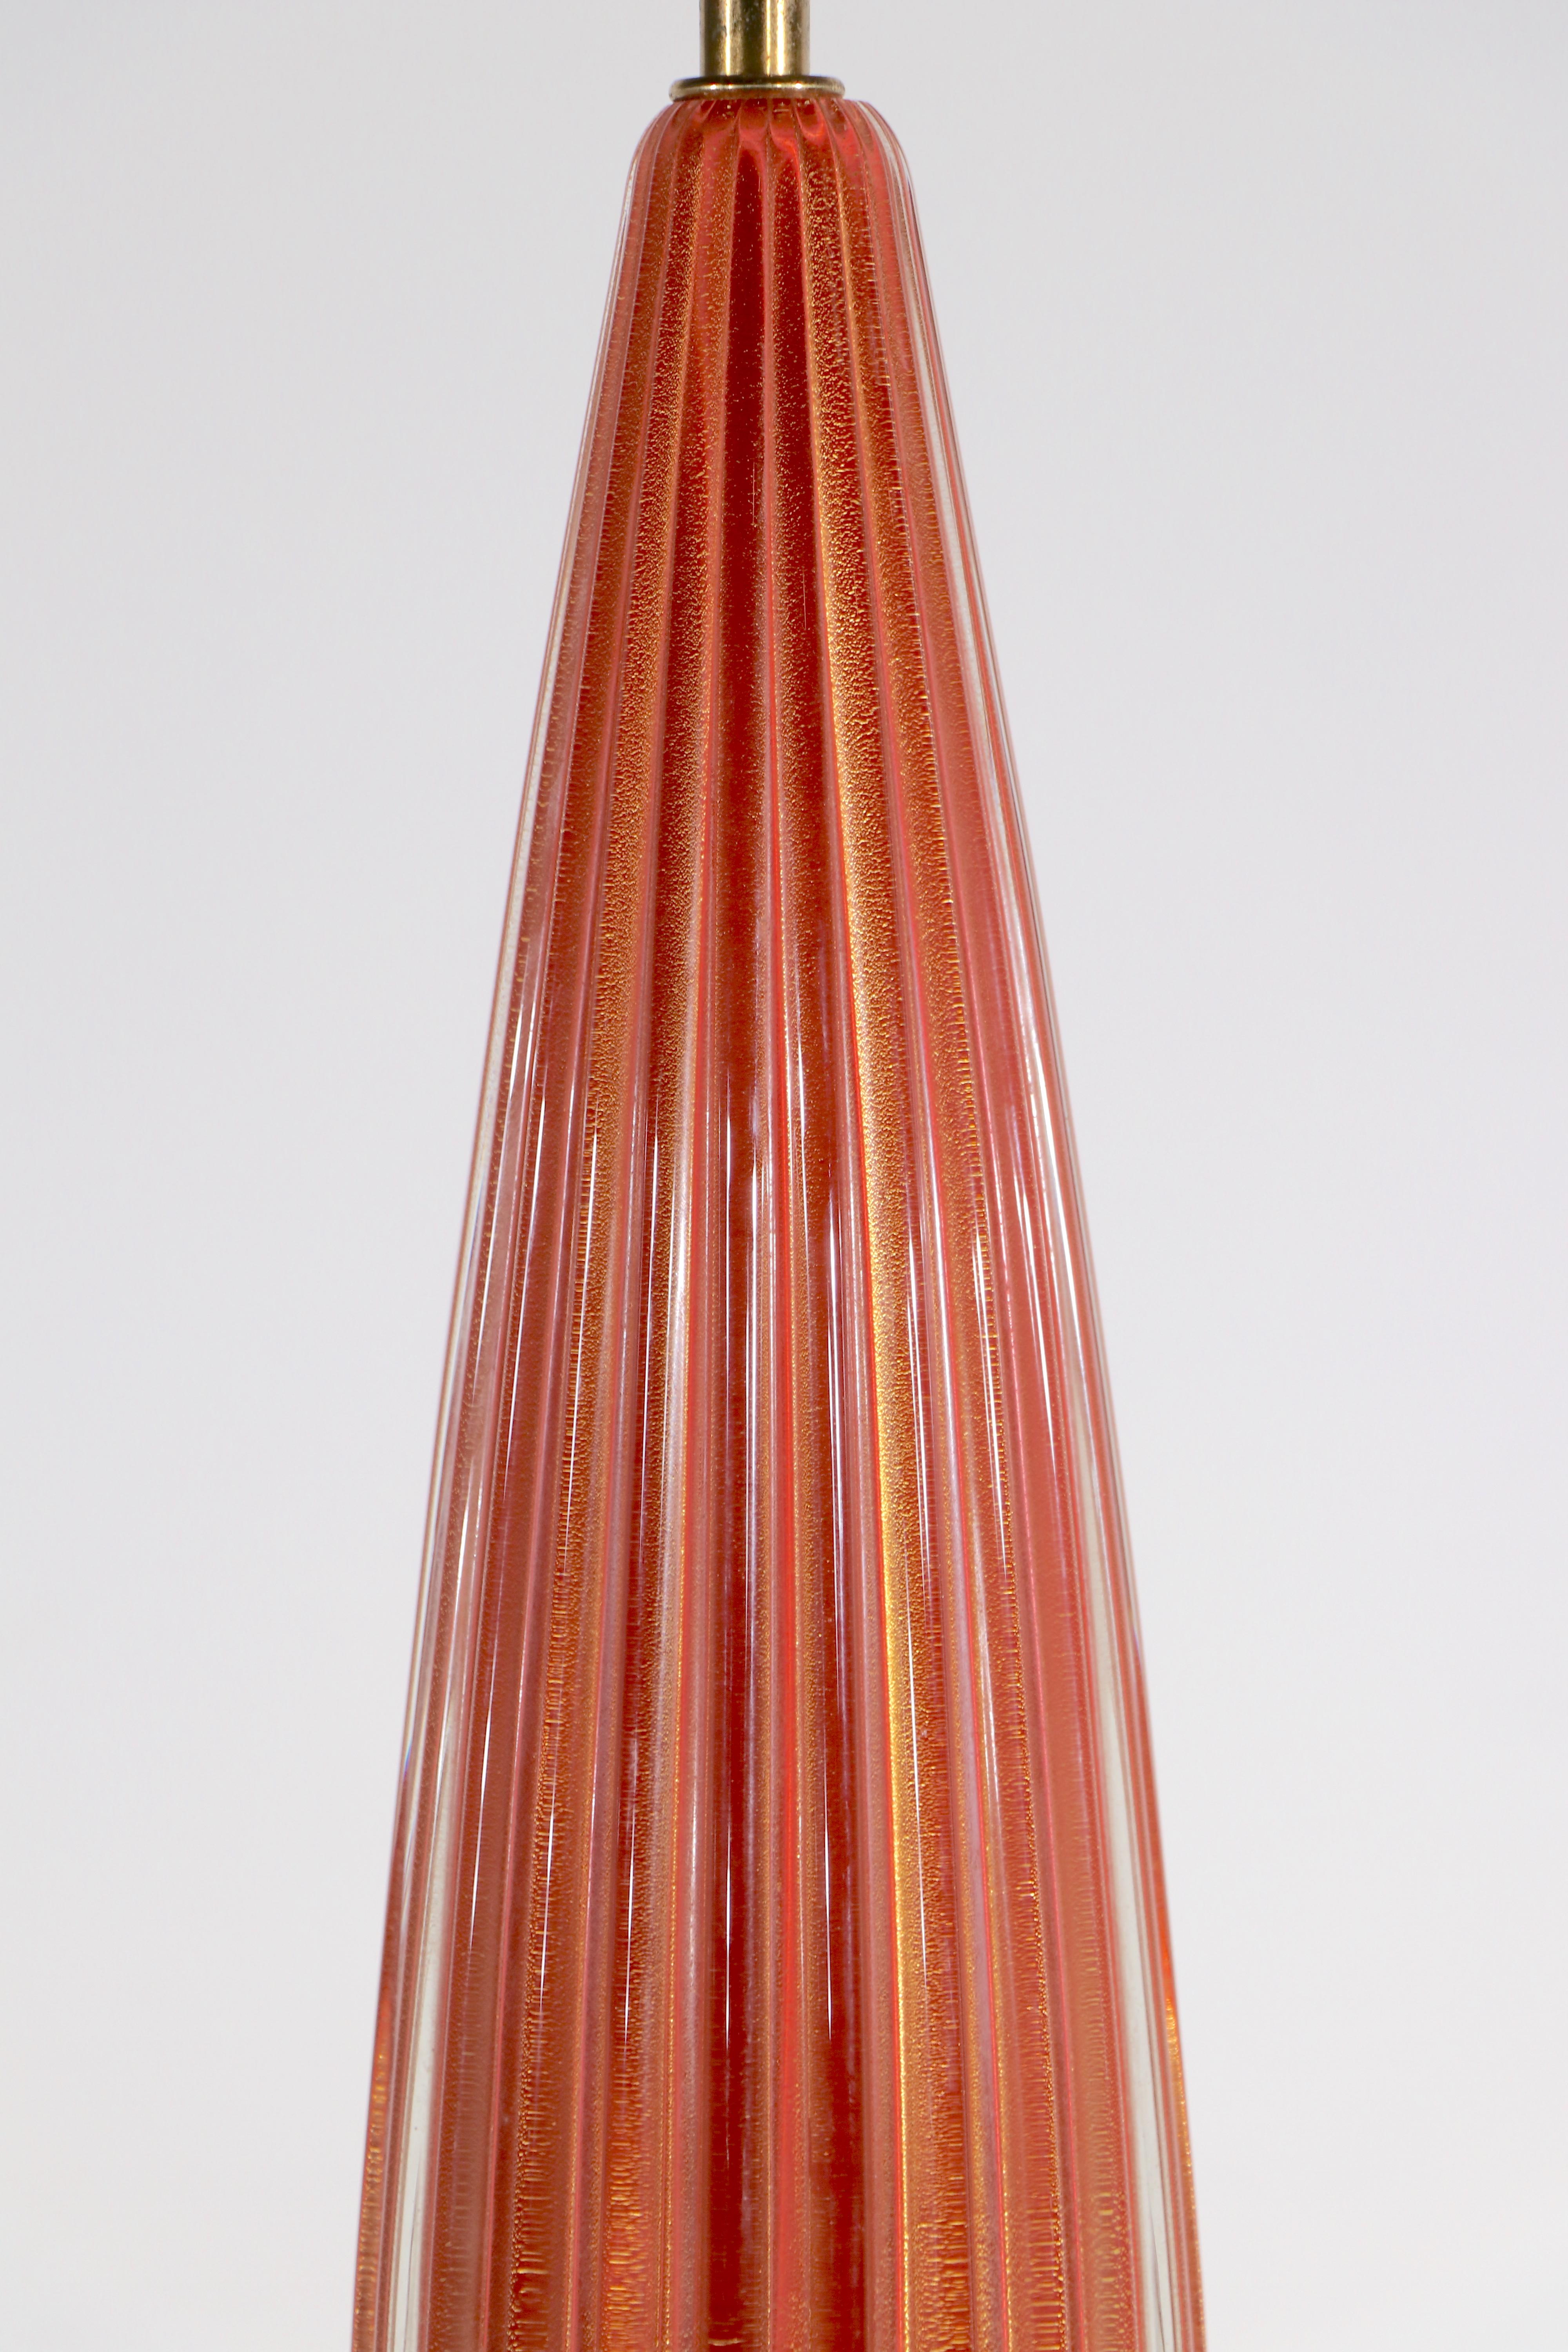 Large Tapered Channeled  Murano Art Glass Table Lamp by Seguso In Good Condition In New York, NY